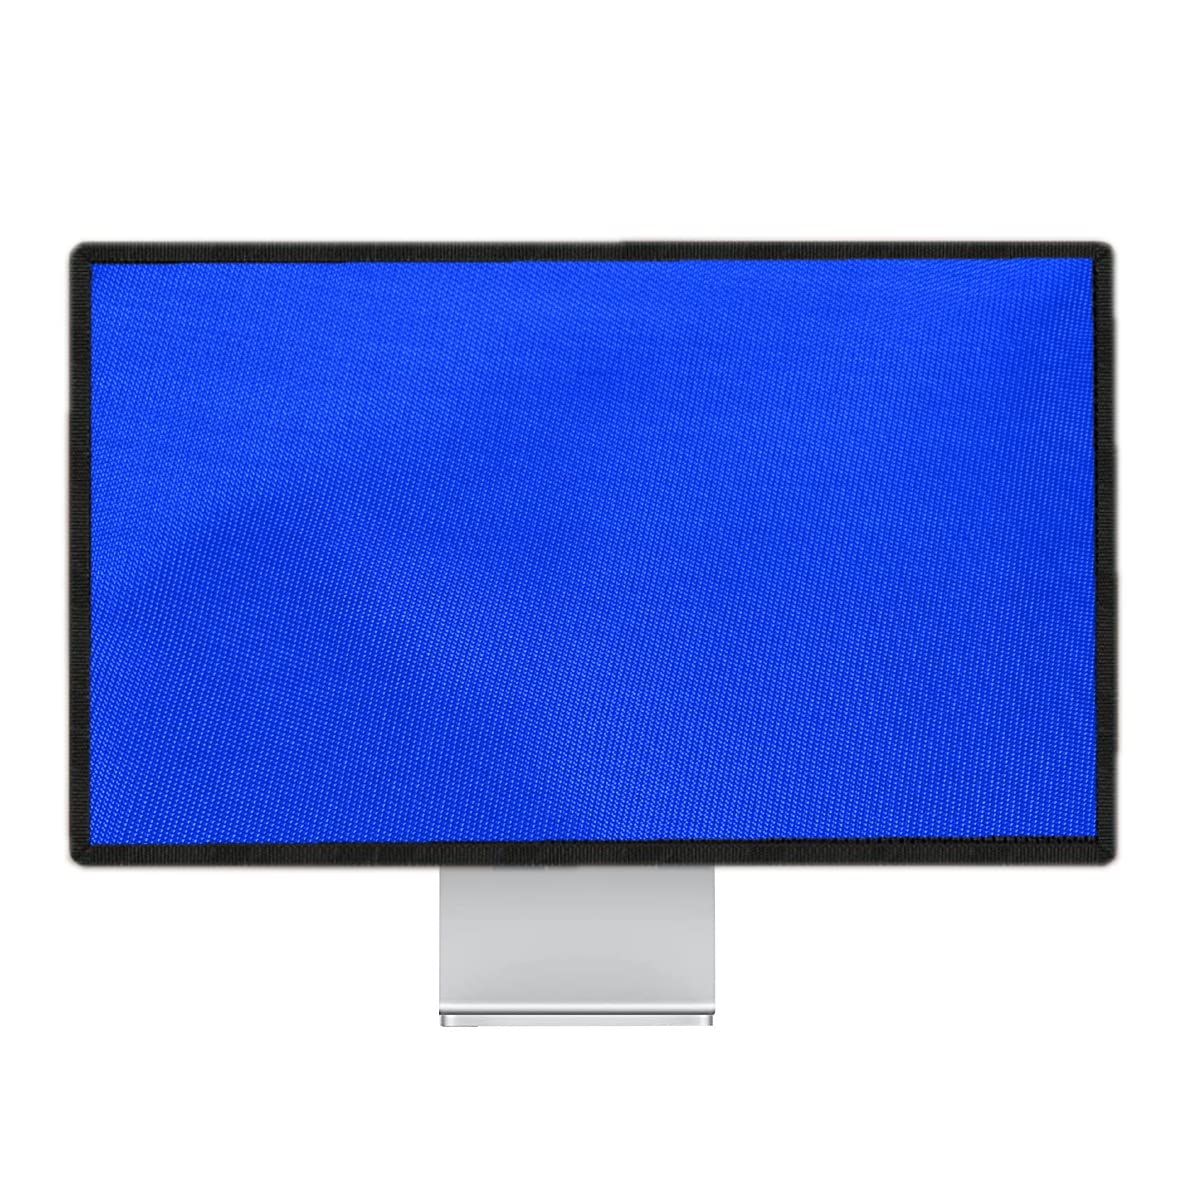 PalaP Super Premium Dust Proof Monitor Cover for HP All in ONE Desktop 27 inches (Bright Blue)